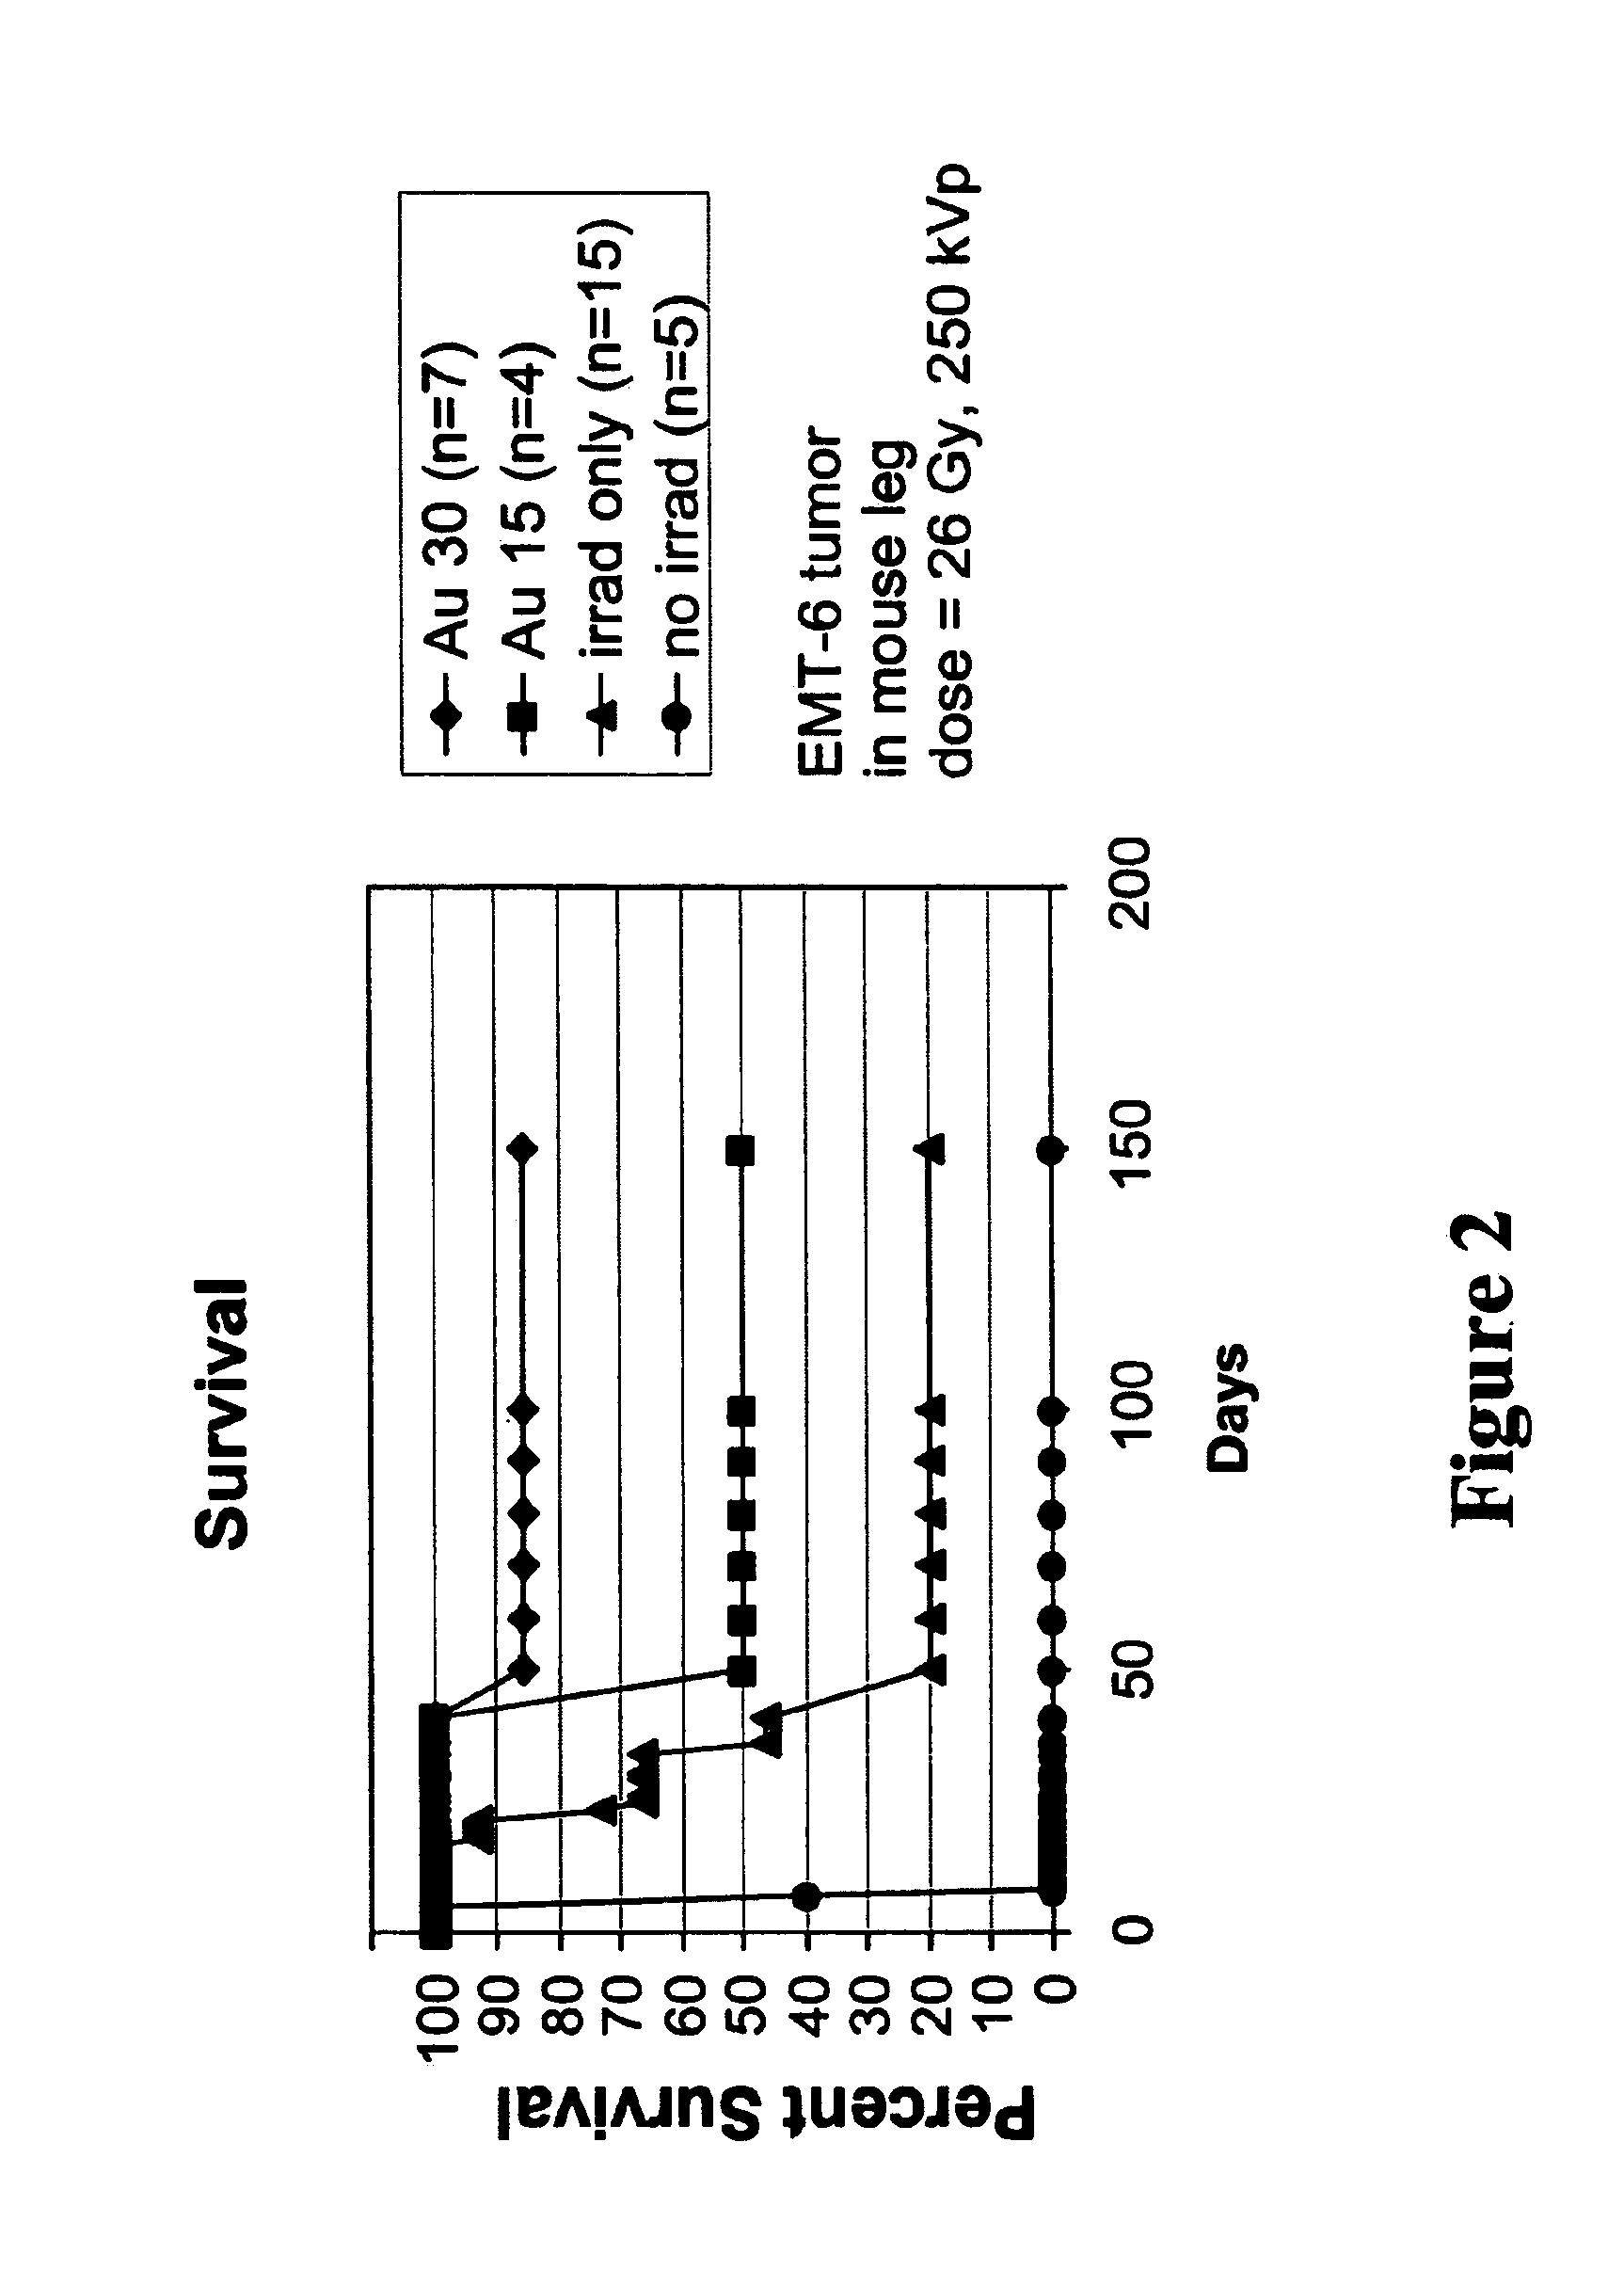 Methods of enhancing radiation effects with metal nanoparticles